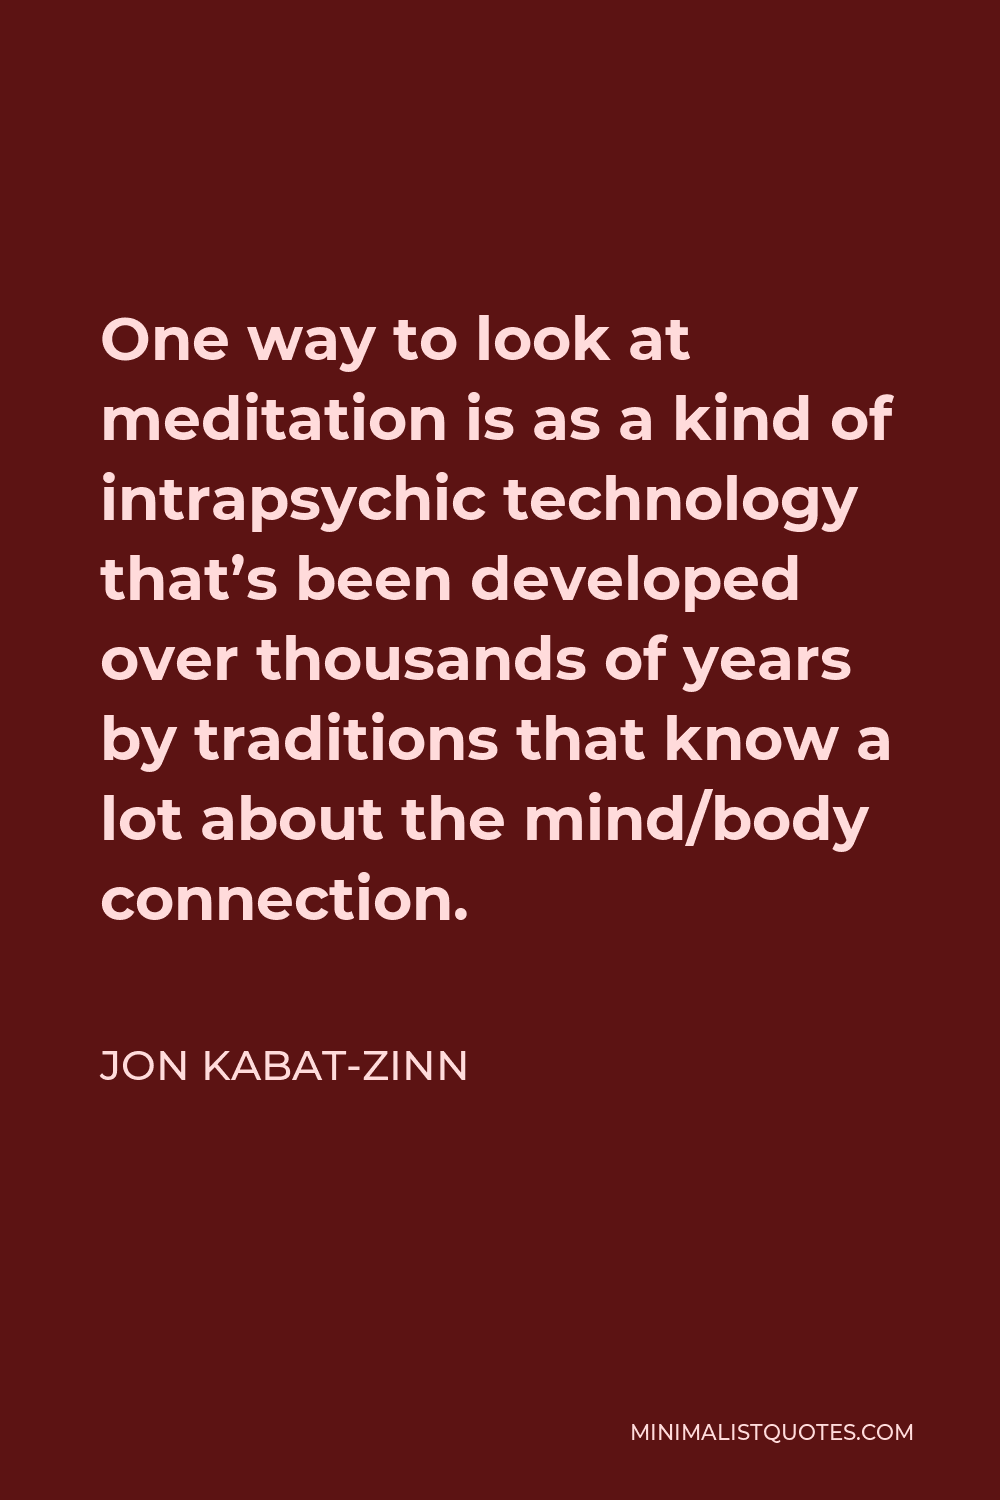 Jon Kabat-Zinn Quote - One way to look at meditation is as a kind of intrapsychic technology that’s been developed over thousands of years by traditions that know a lot about the mind/body connection.